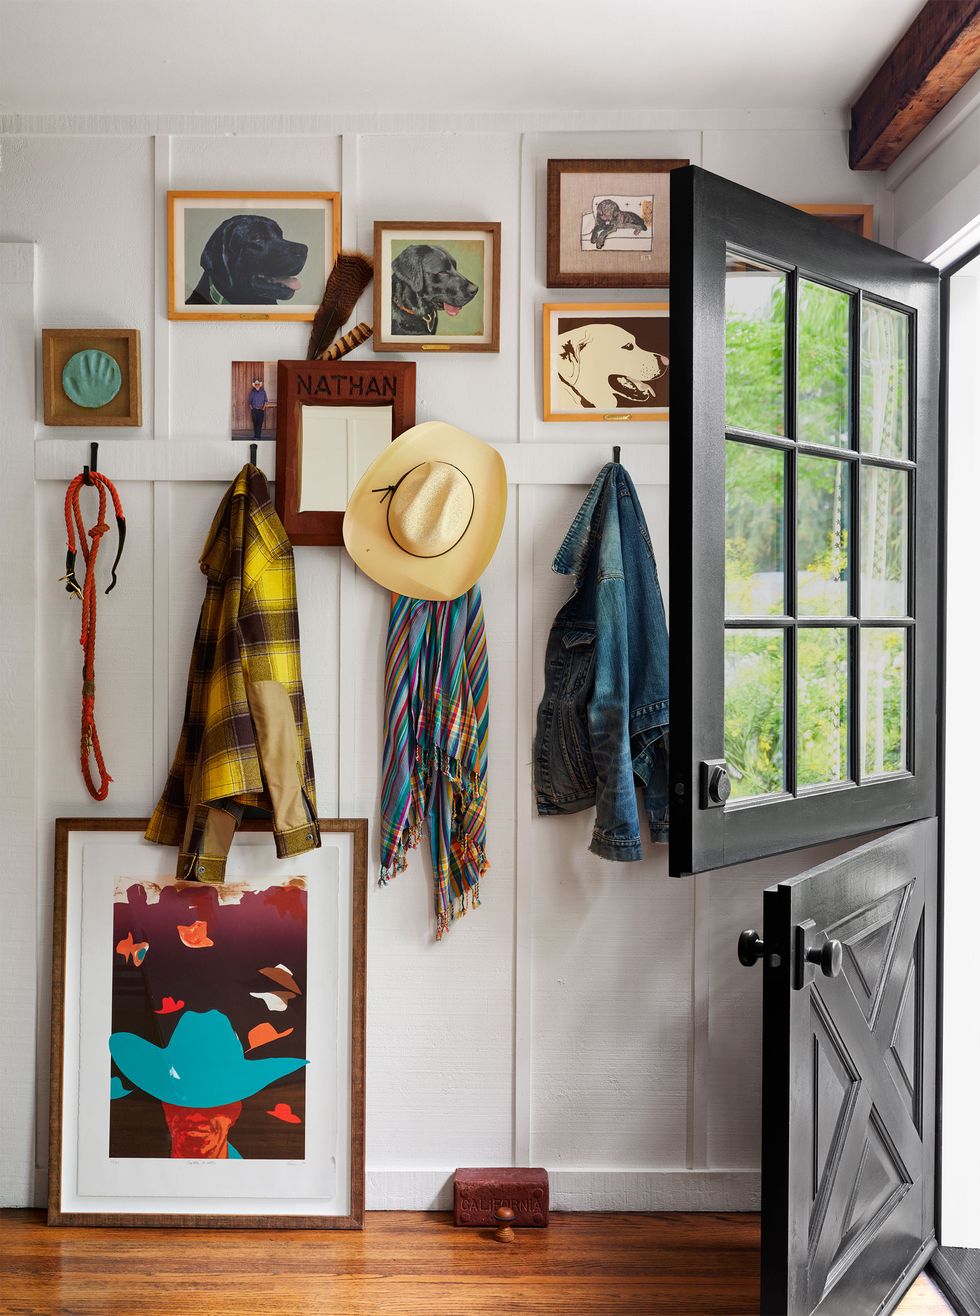 an entry with a black dutch door, wood floor, white walls with hooks holding jackets, scarf, and hat, a mirror, several framed pictures of dogs, a larger framed image of a man in a hat leans against the wall